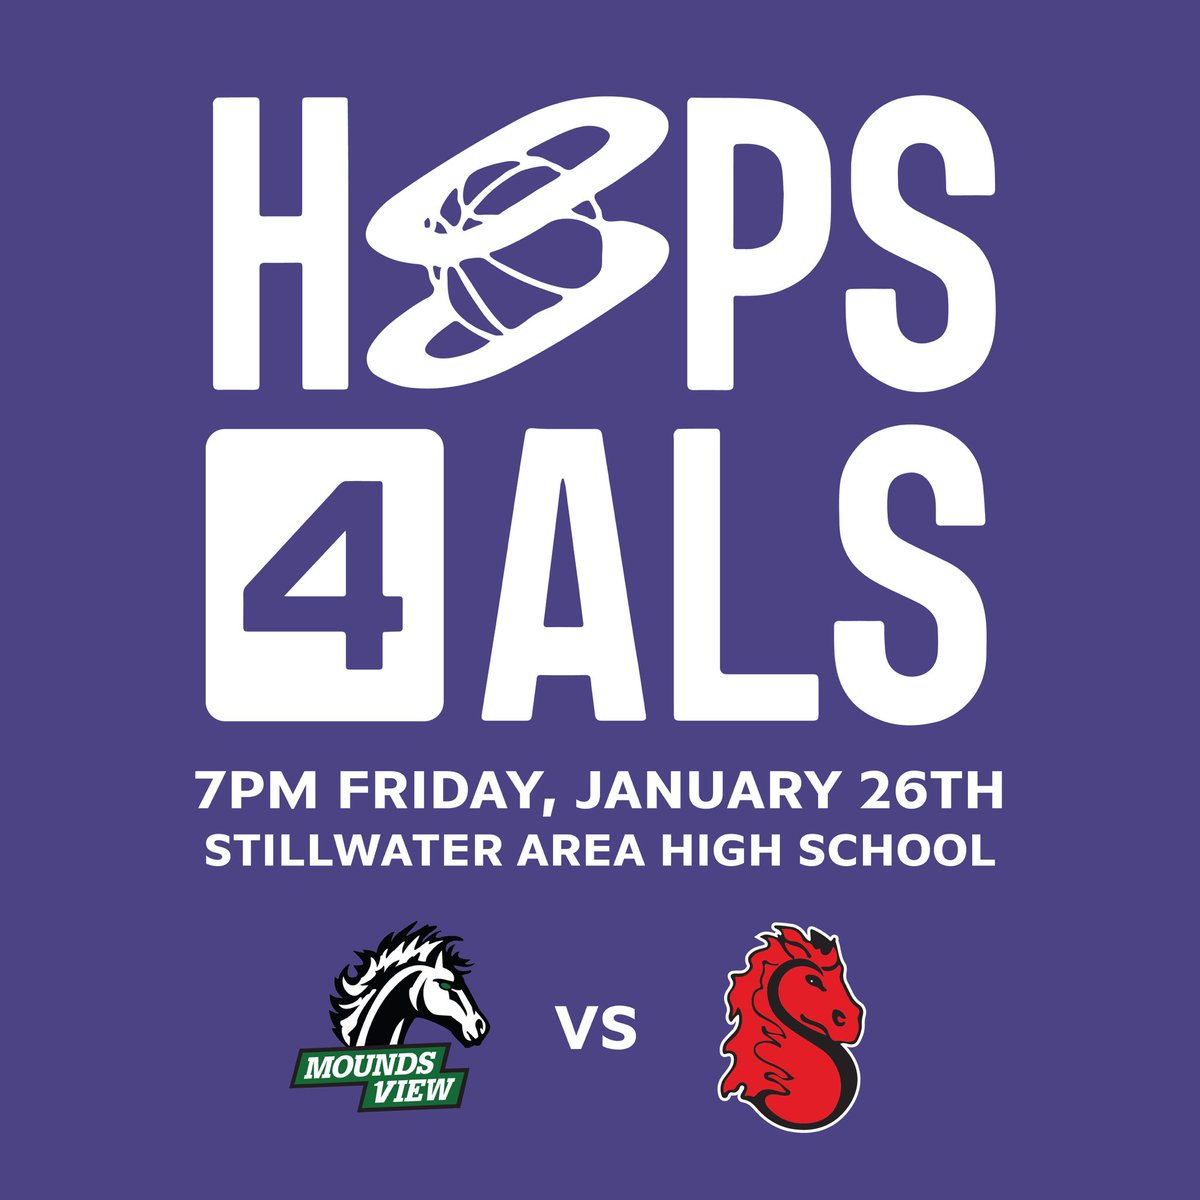 Come support ALS awareness on Friday, January 26. The Ponies will take on @MVMustangsHoops at 7:00pm. This will be the second Hoops4ALS game benefiting the ALS Therapy Development Institute, first being Duke vs Pitt last week. Let’s keep the momentum going!! @NorthstarAlex